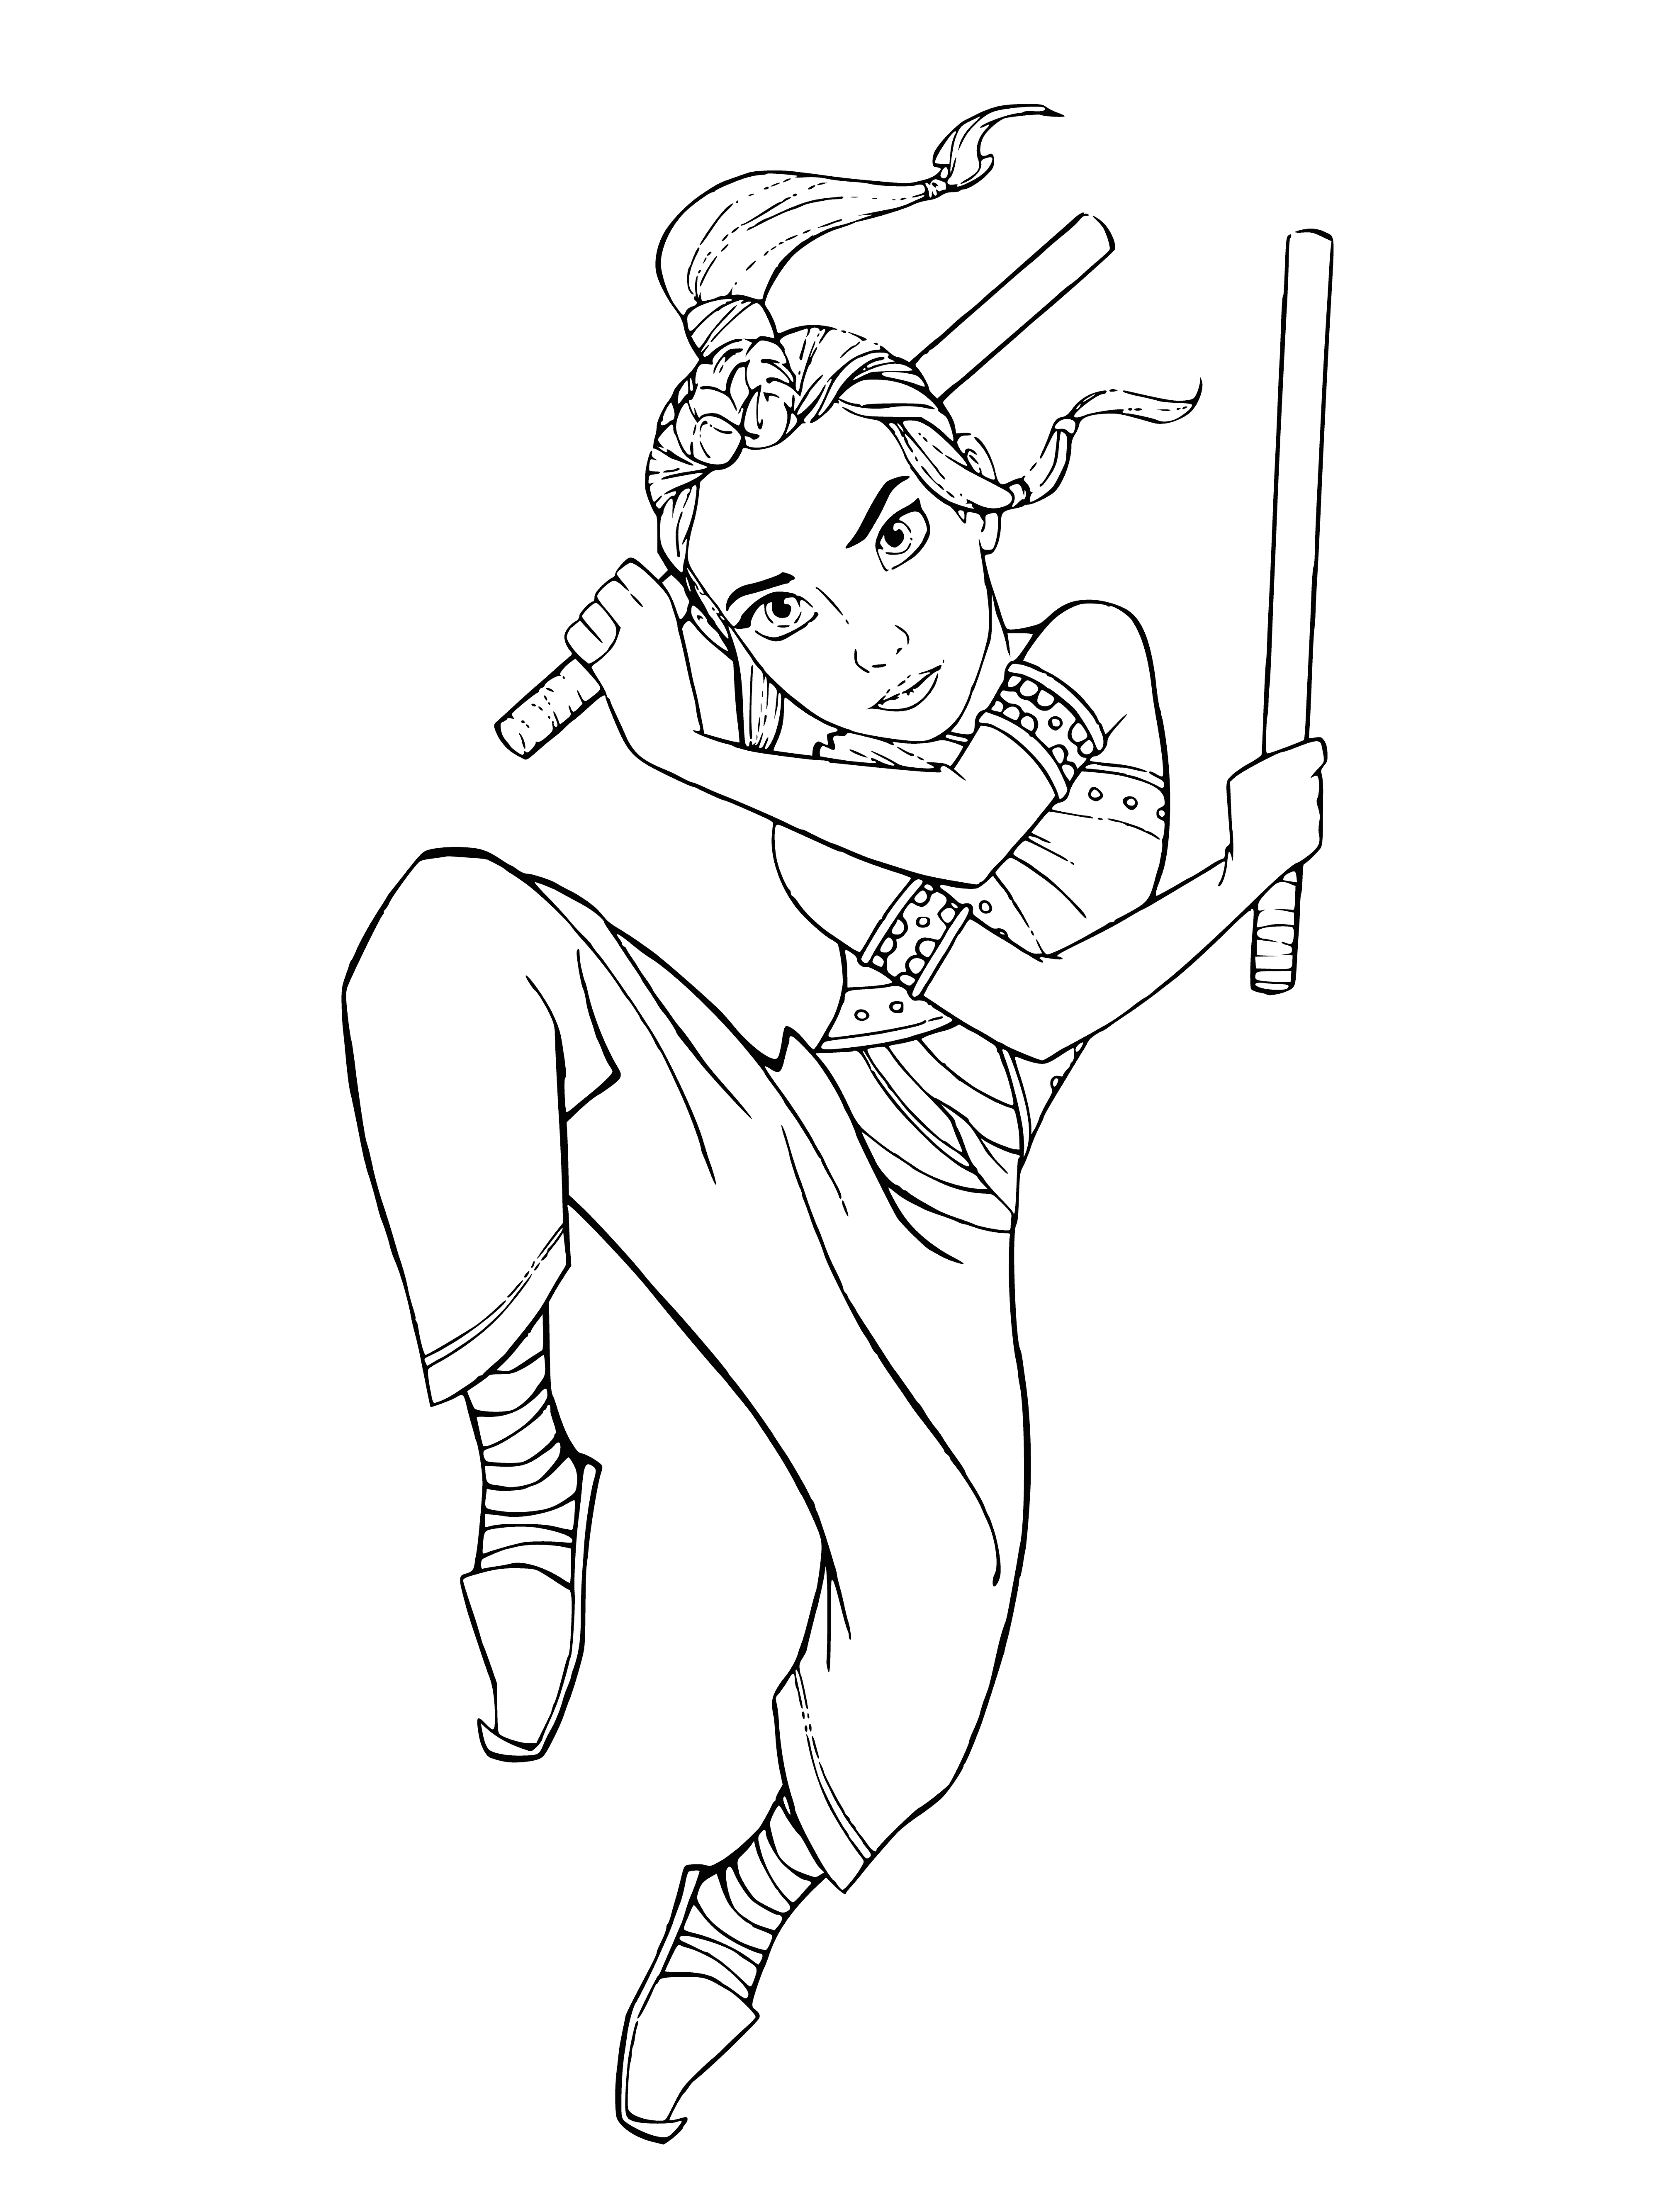 Little Raya coloring page